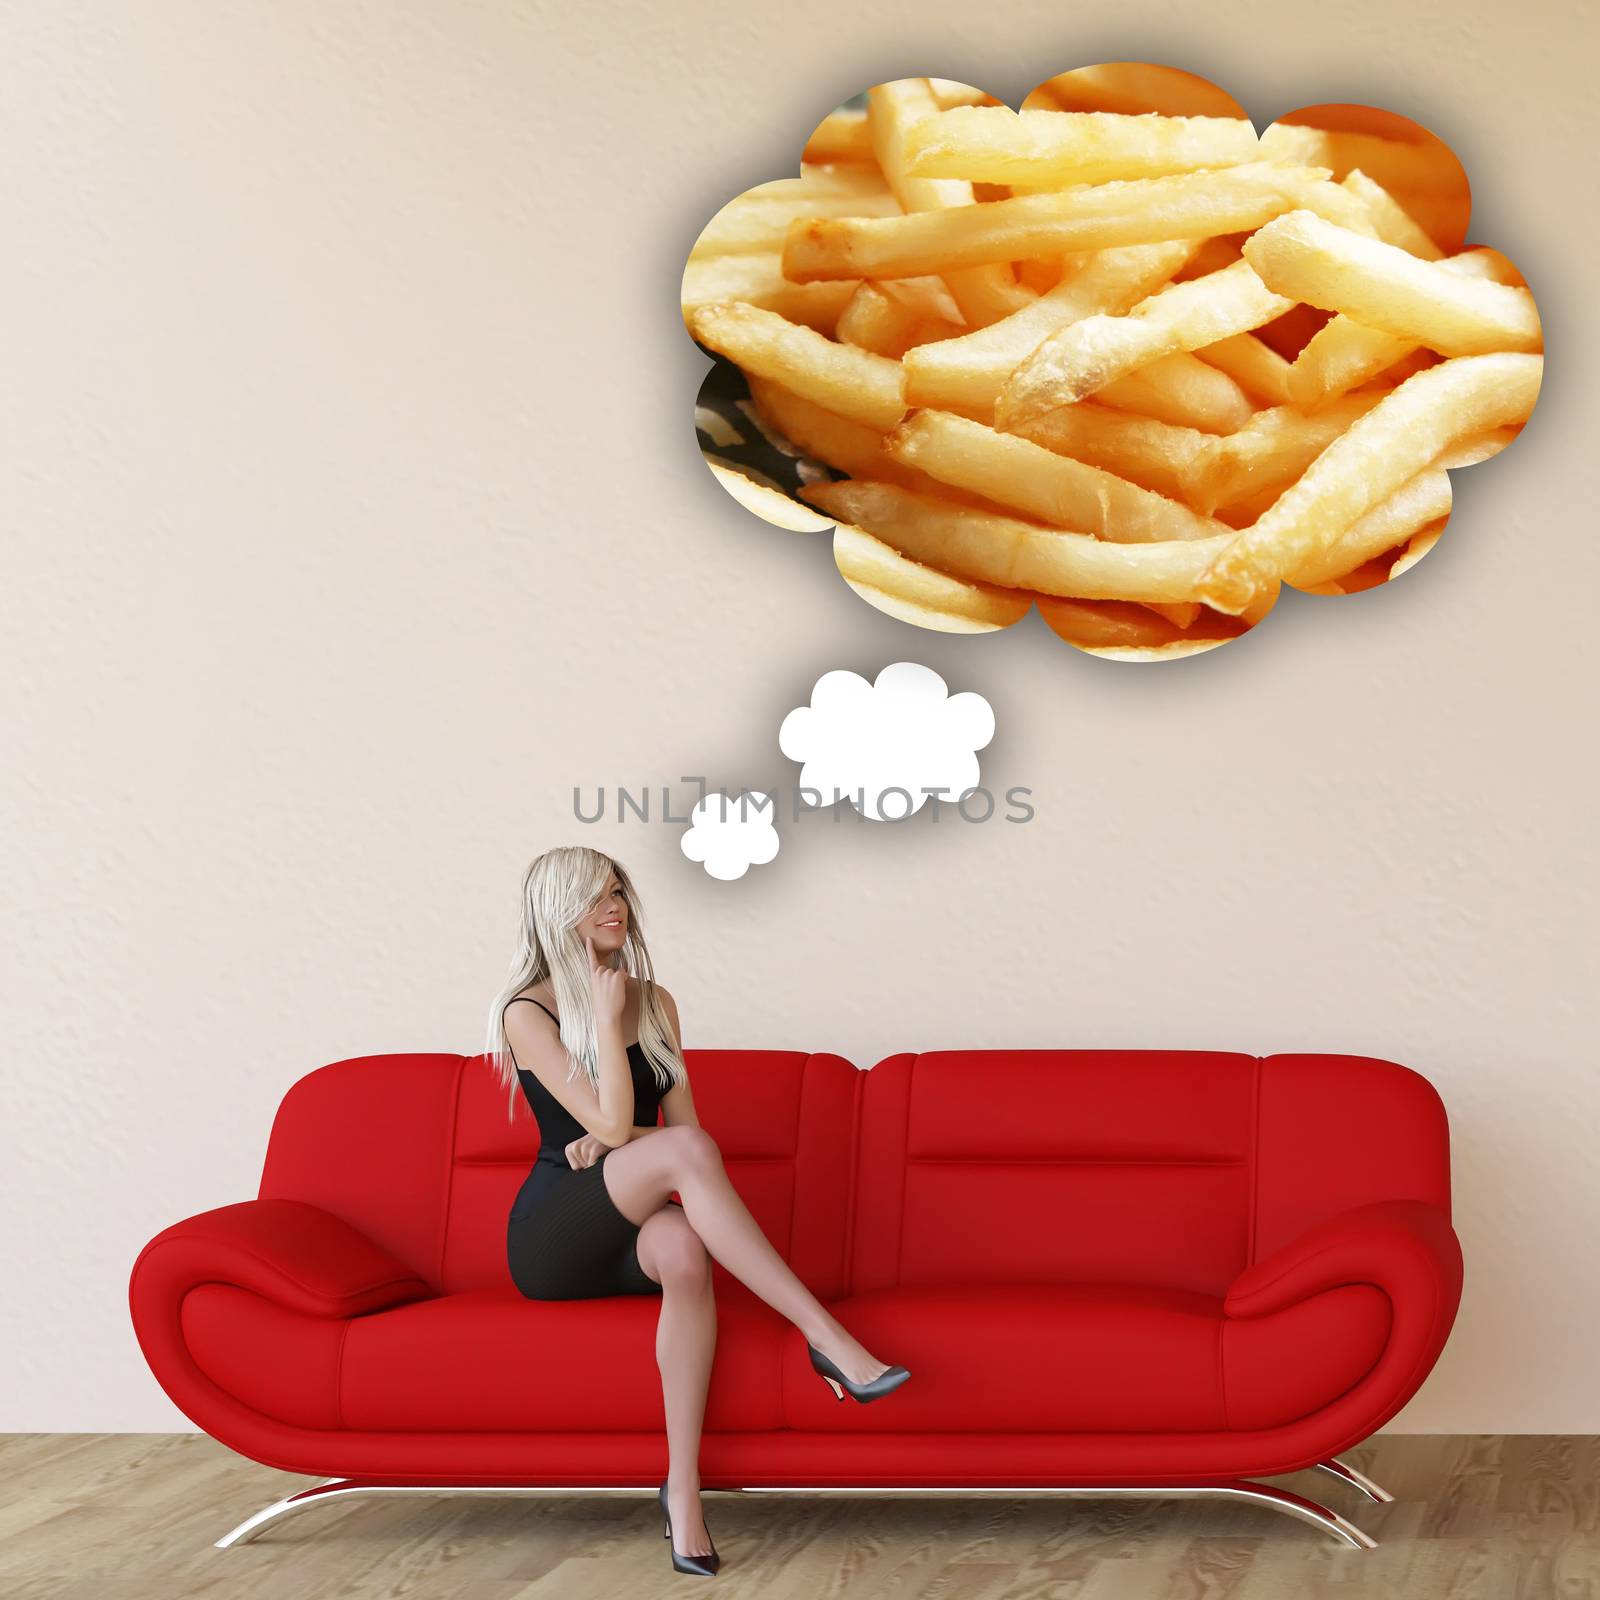 Woman Craving French Fries and Thinking About Eating Food